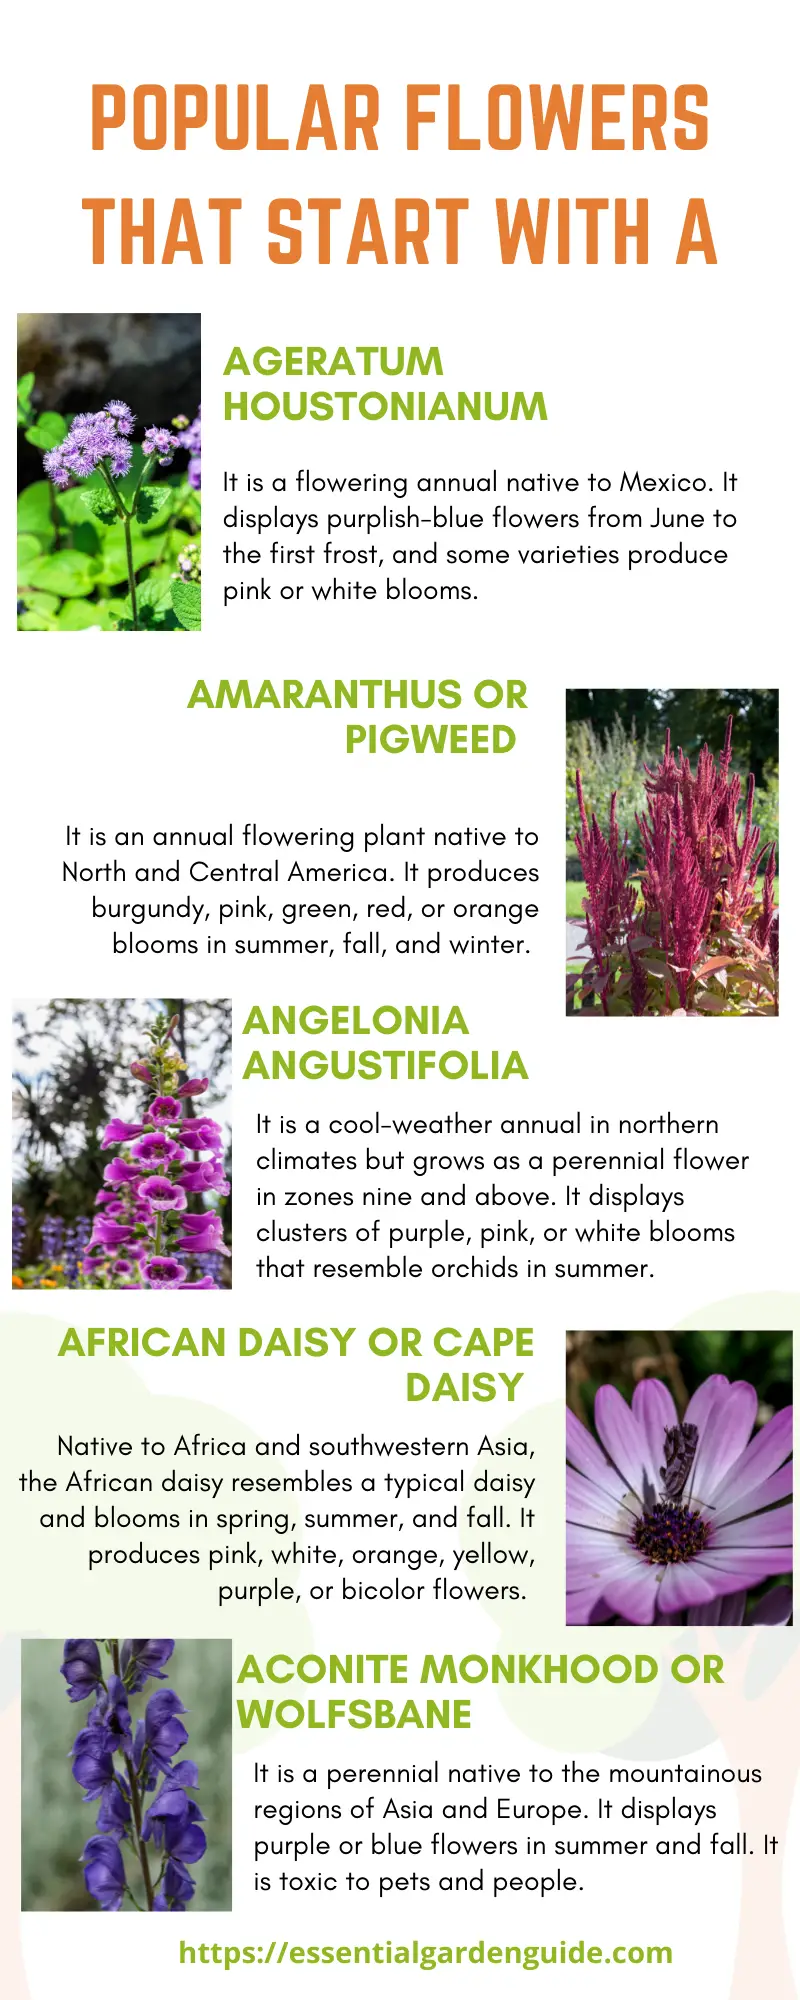 Infographic - 5 flowers starting with A that are favorites